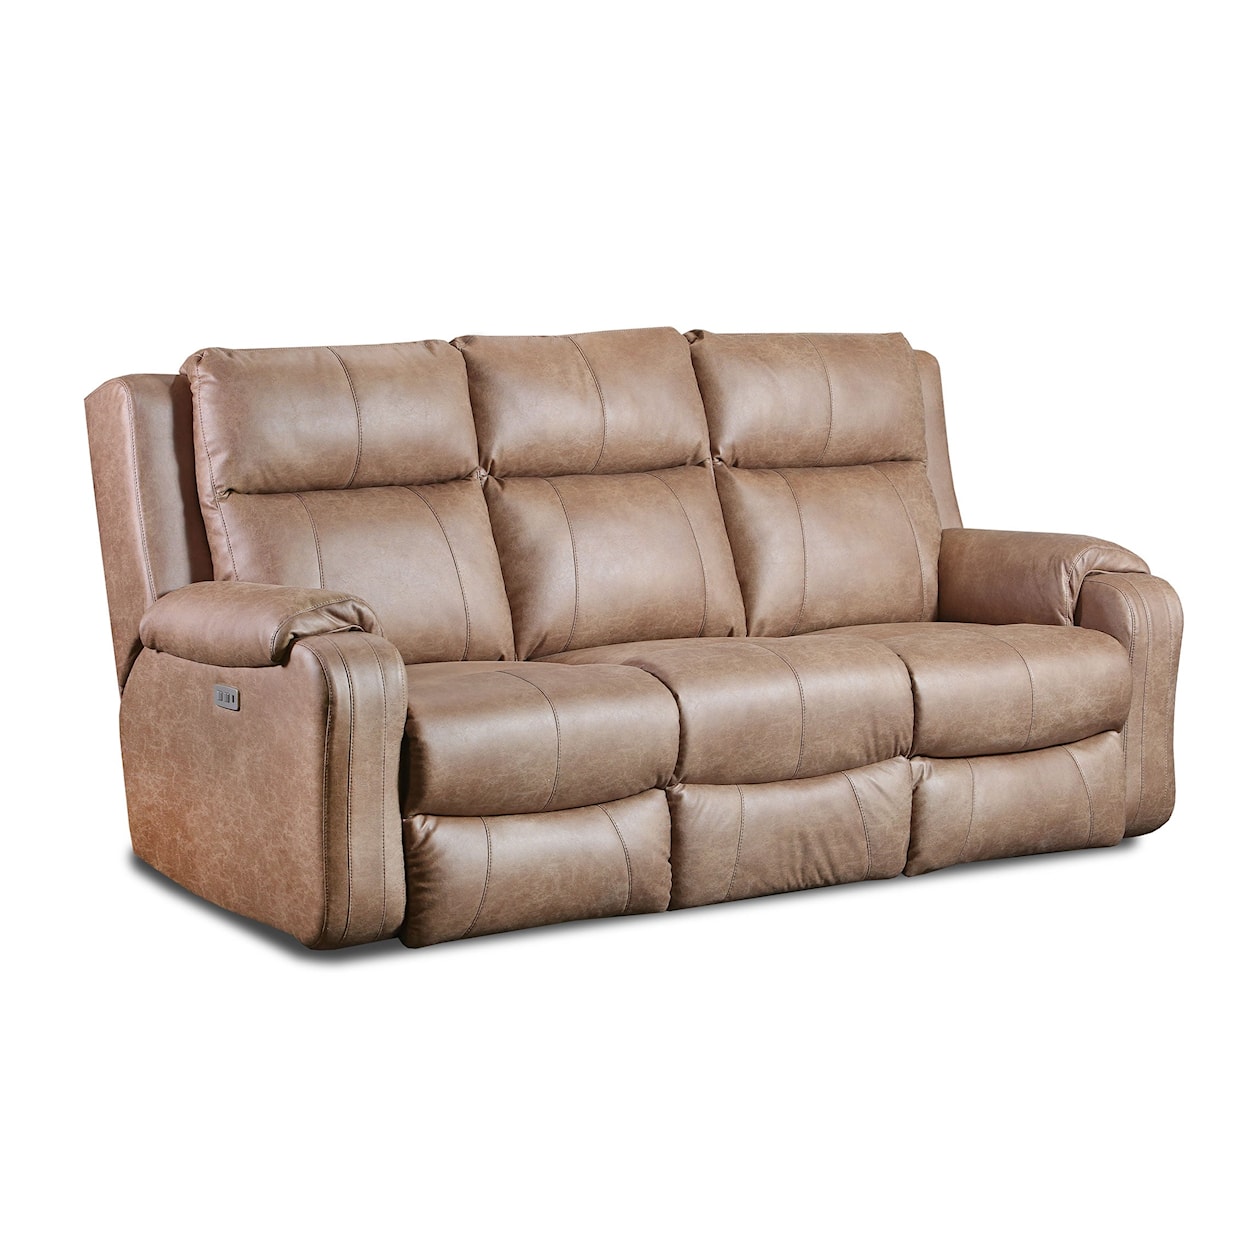 Southern Motion Contour Double Manual Reclining Sofa